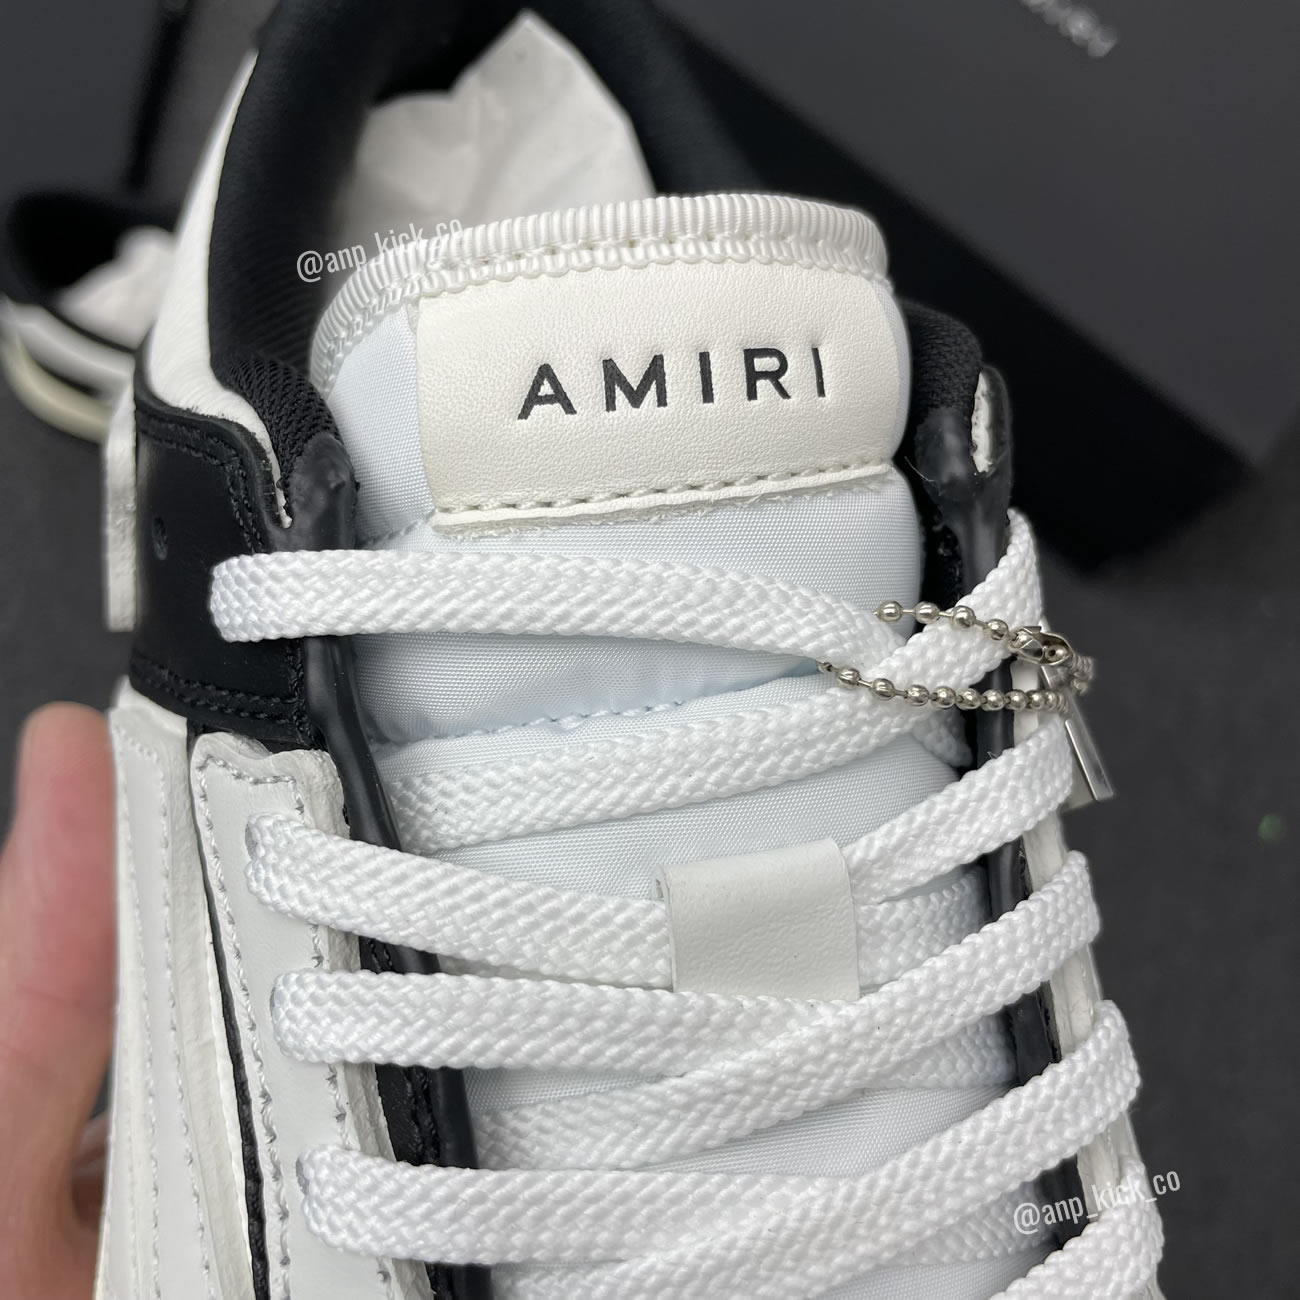 A M I R I Skel Top Low Leather Sneakers Black White Anpkick Mfs003 000 (4) - newkick.org